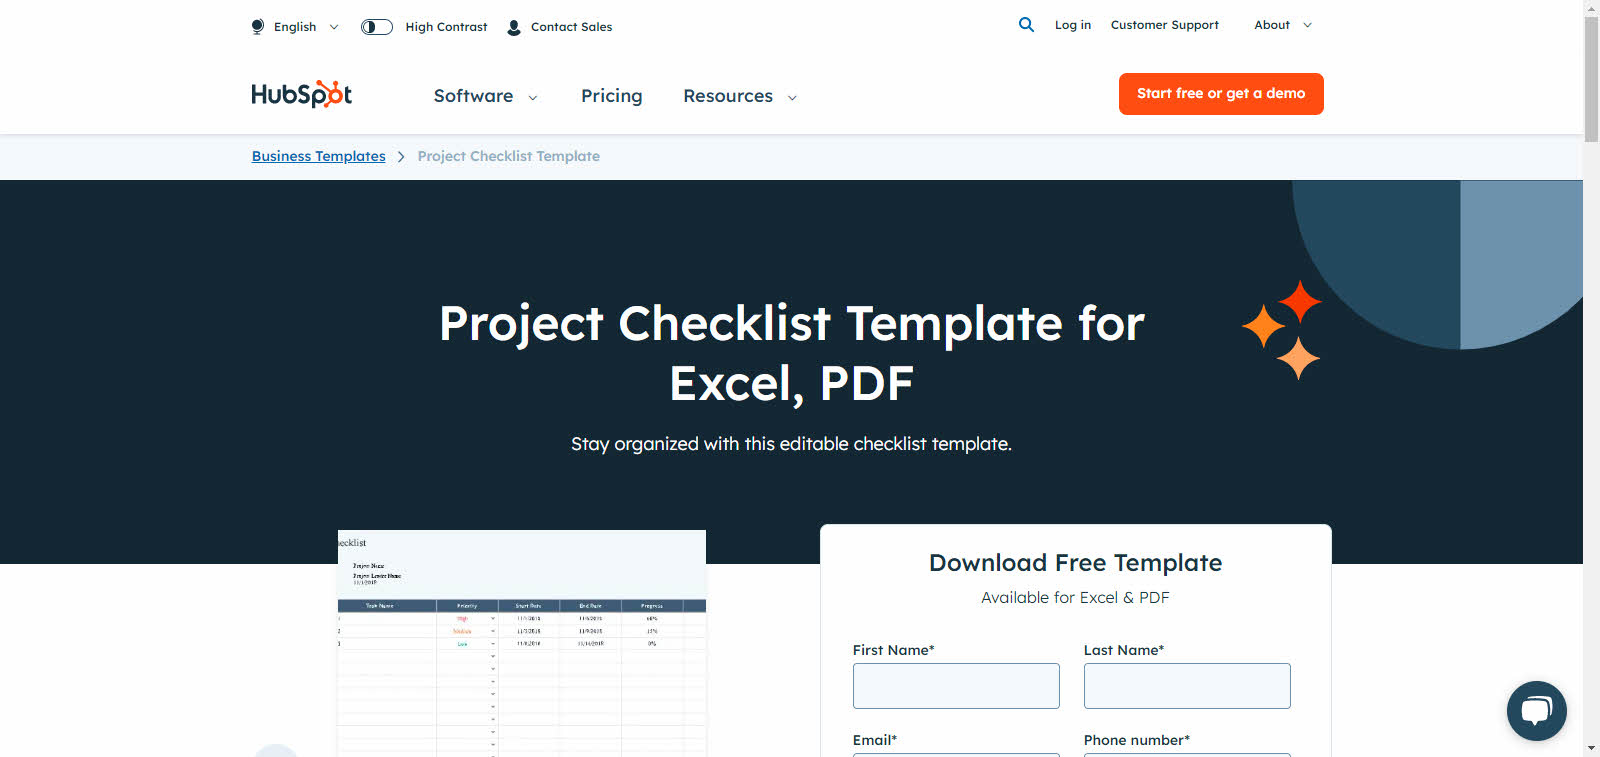 HubSpot Project Checklist Template for Excel, PDF